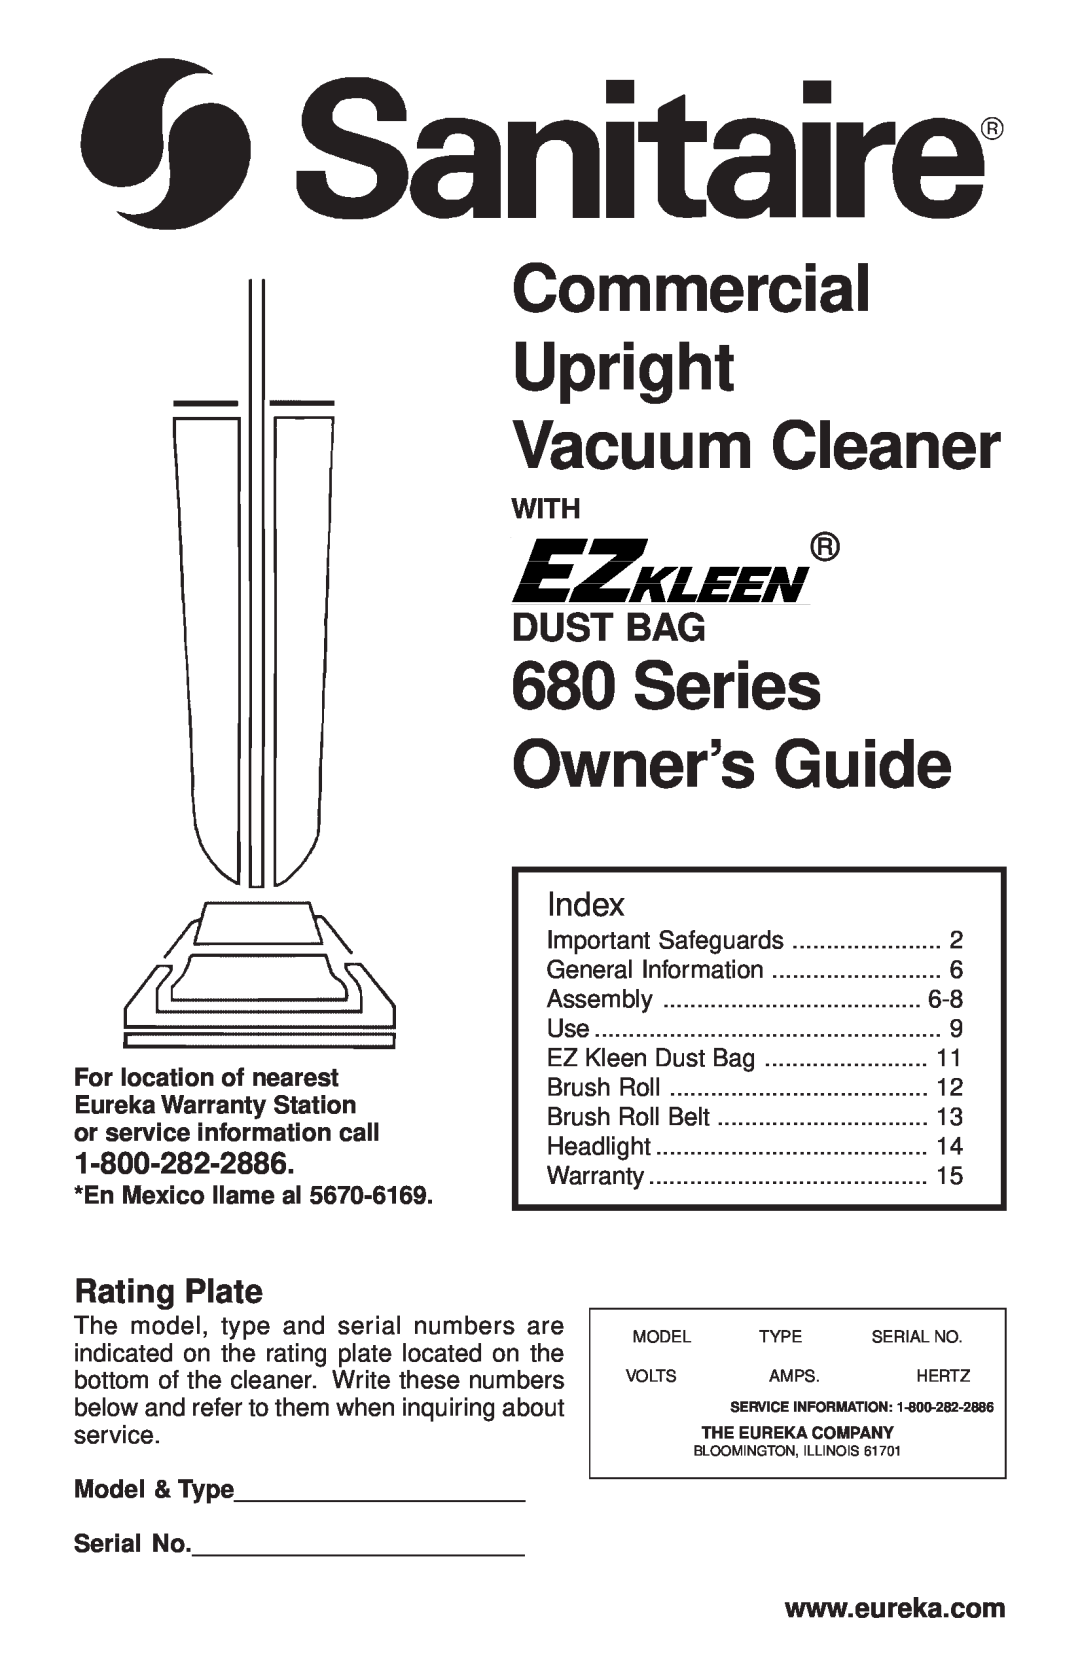 Sanitaire 680 Series warranty Dust Bag, Rating Plate, With, Commercial Upright Vacuum Cleaner, 680Series Owner’s Guide 